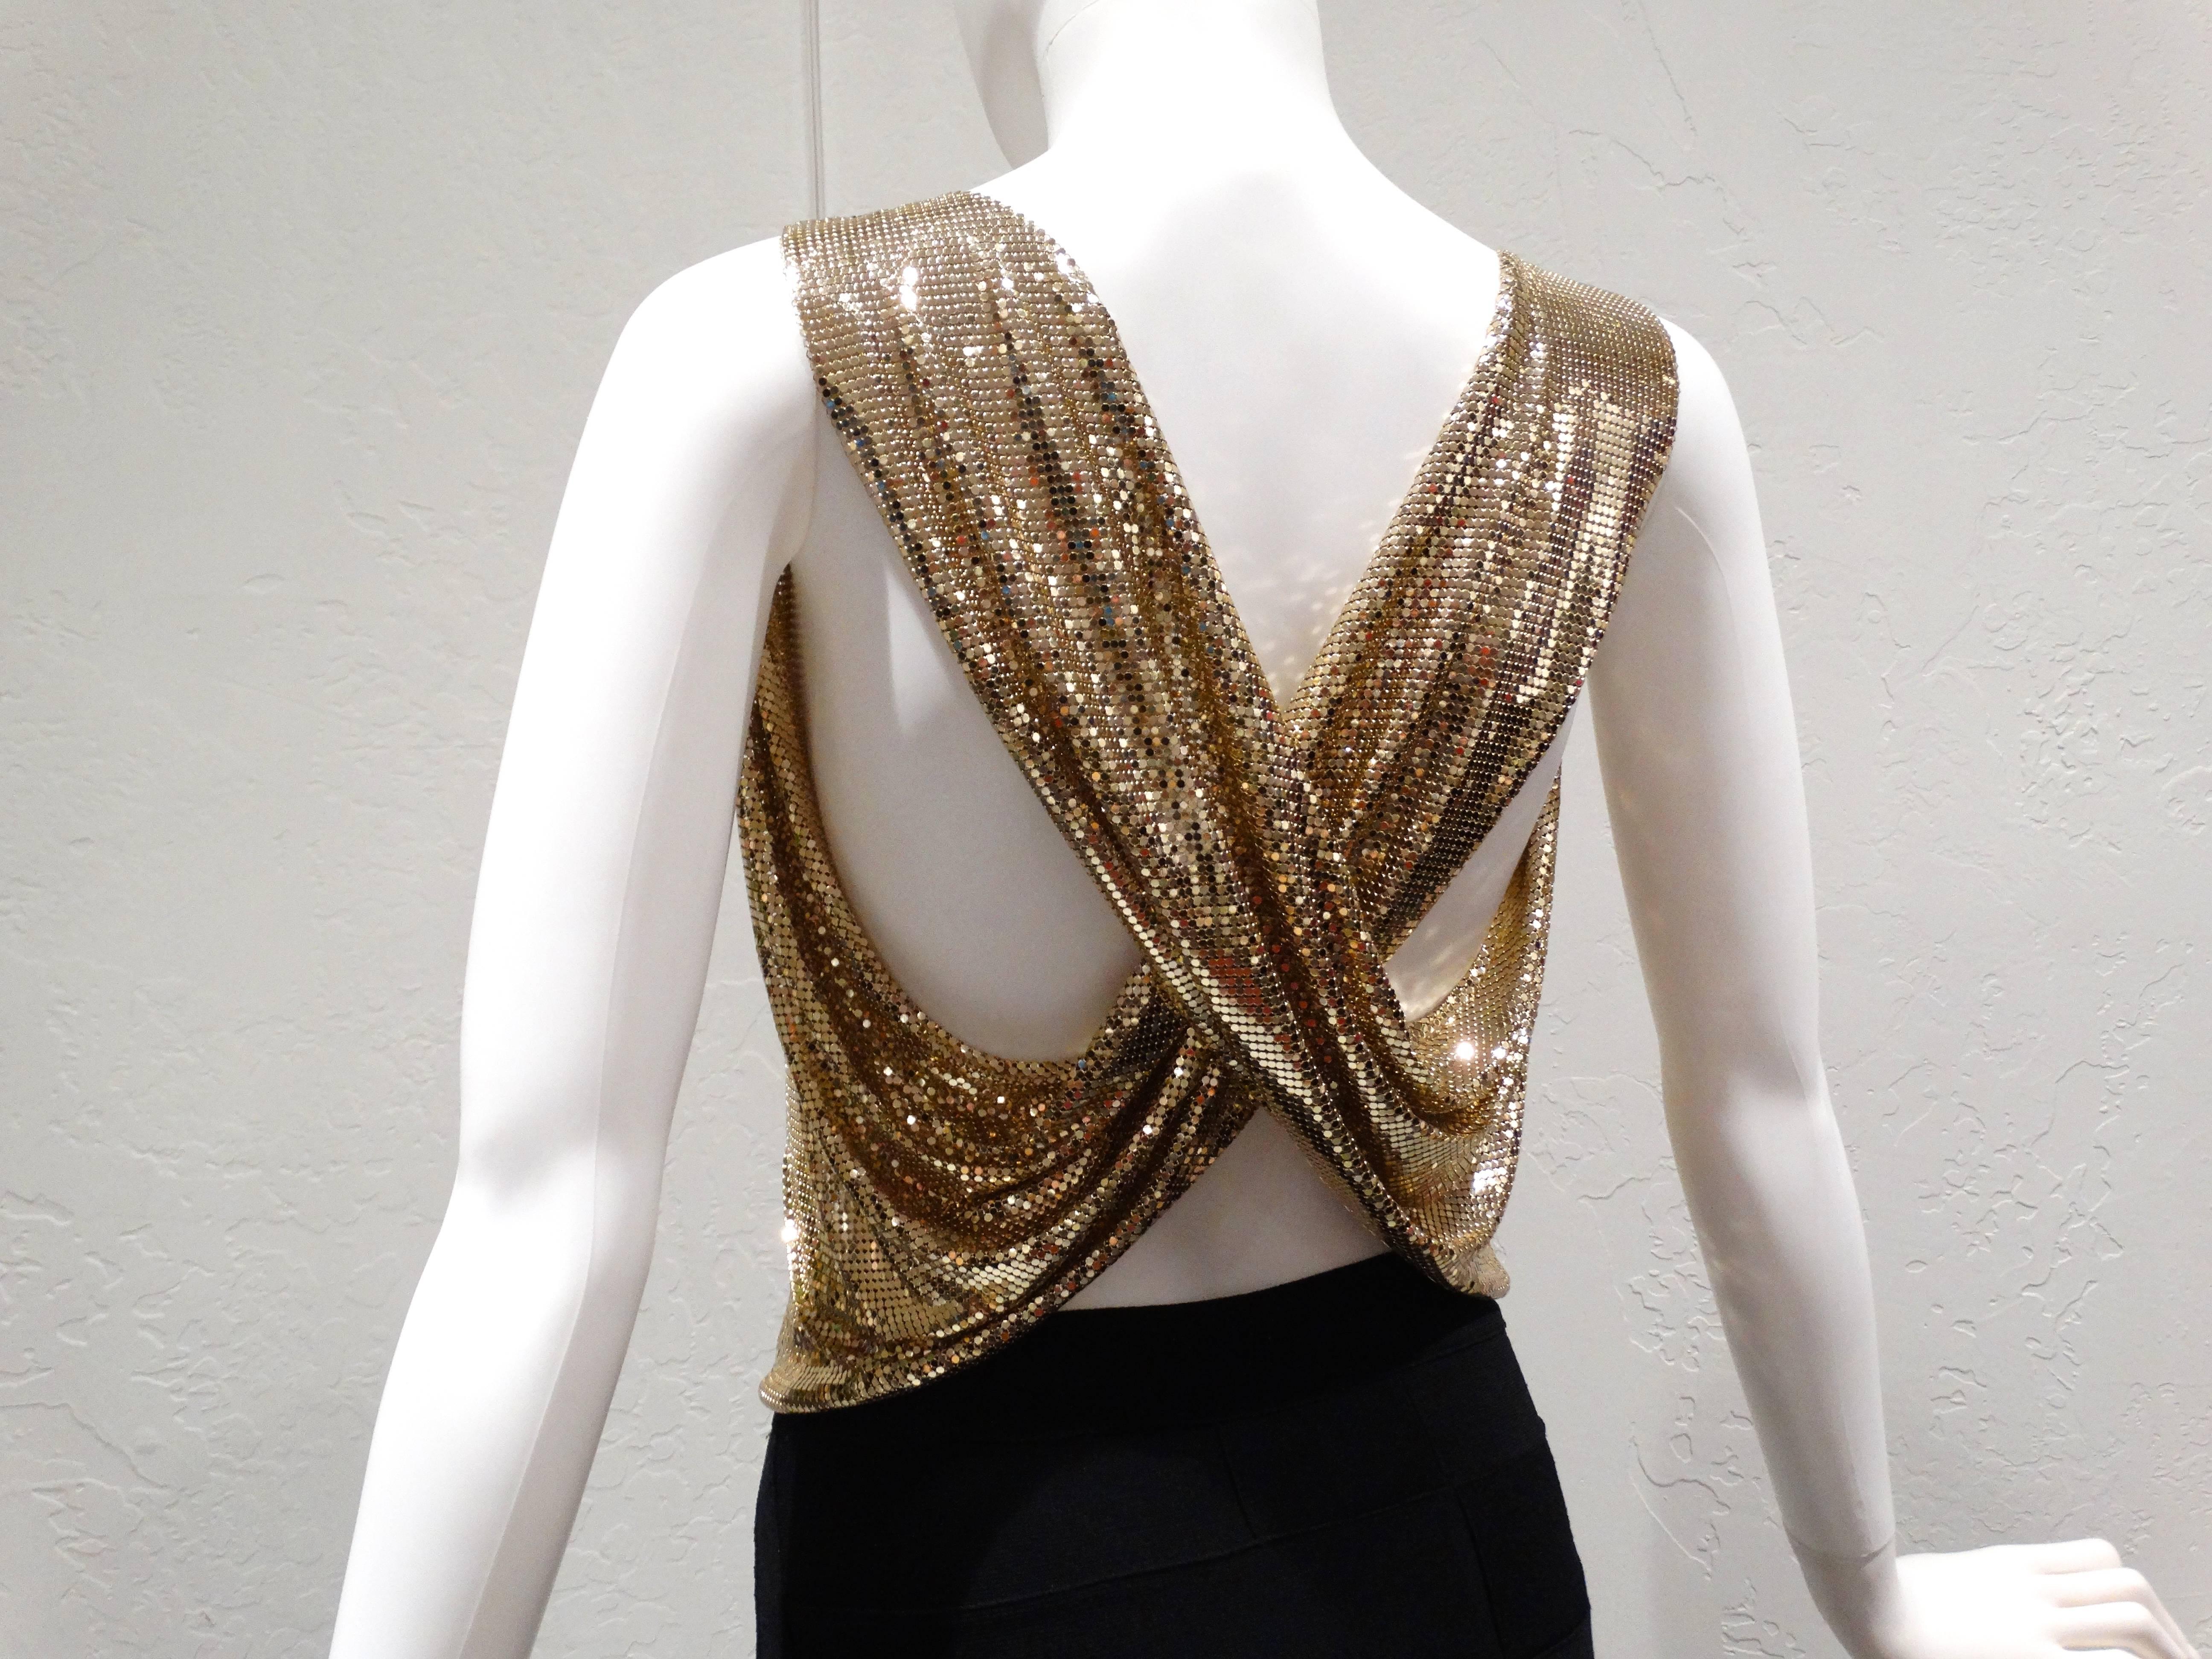 Beautiful Whiting & Davis gold mesh sleeveless top with the most incredible draping in front, back criss crosses. The top has a beautiful drape to it and it is held on by shoulder straps. As with all these W&D mesh tops, it is quite heavy and very